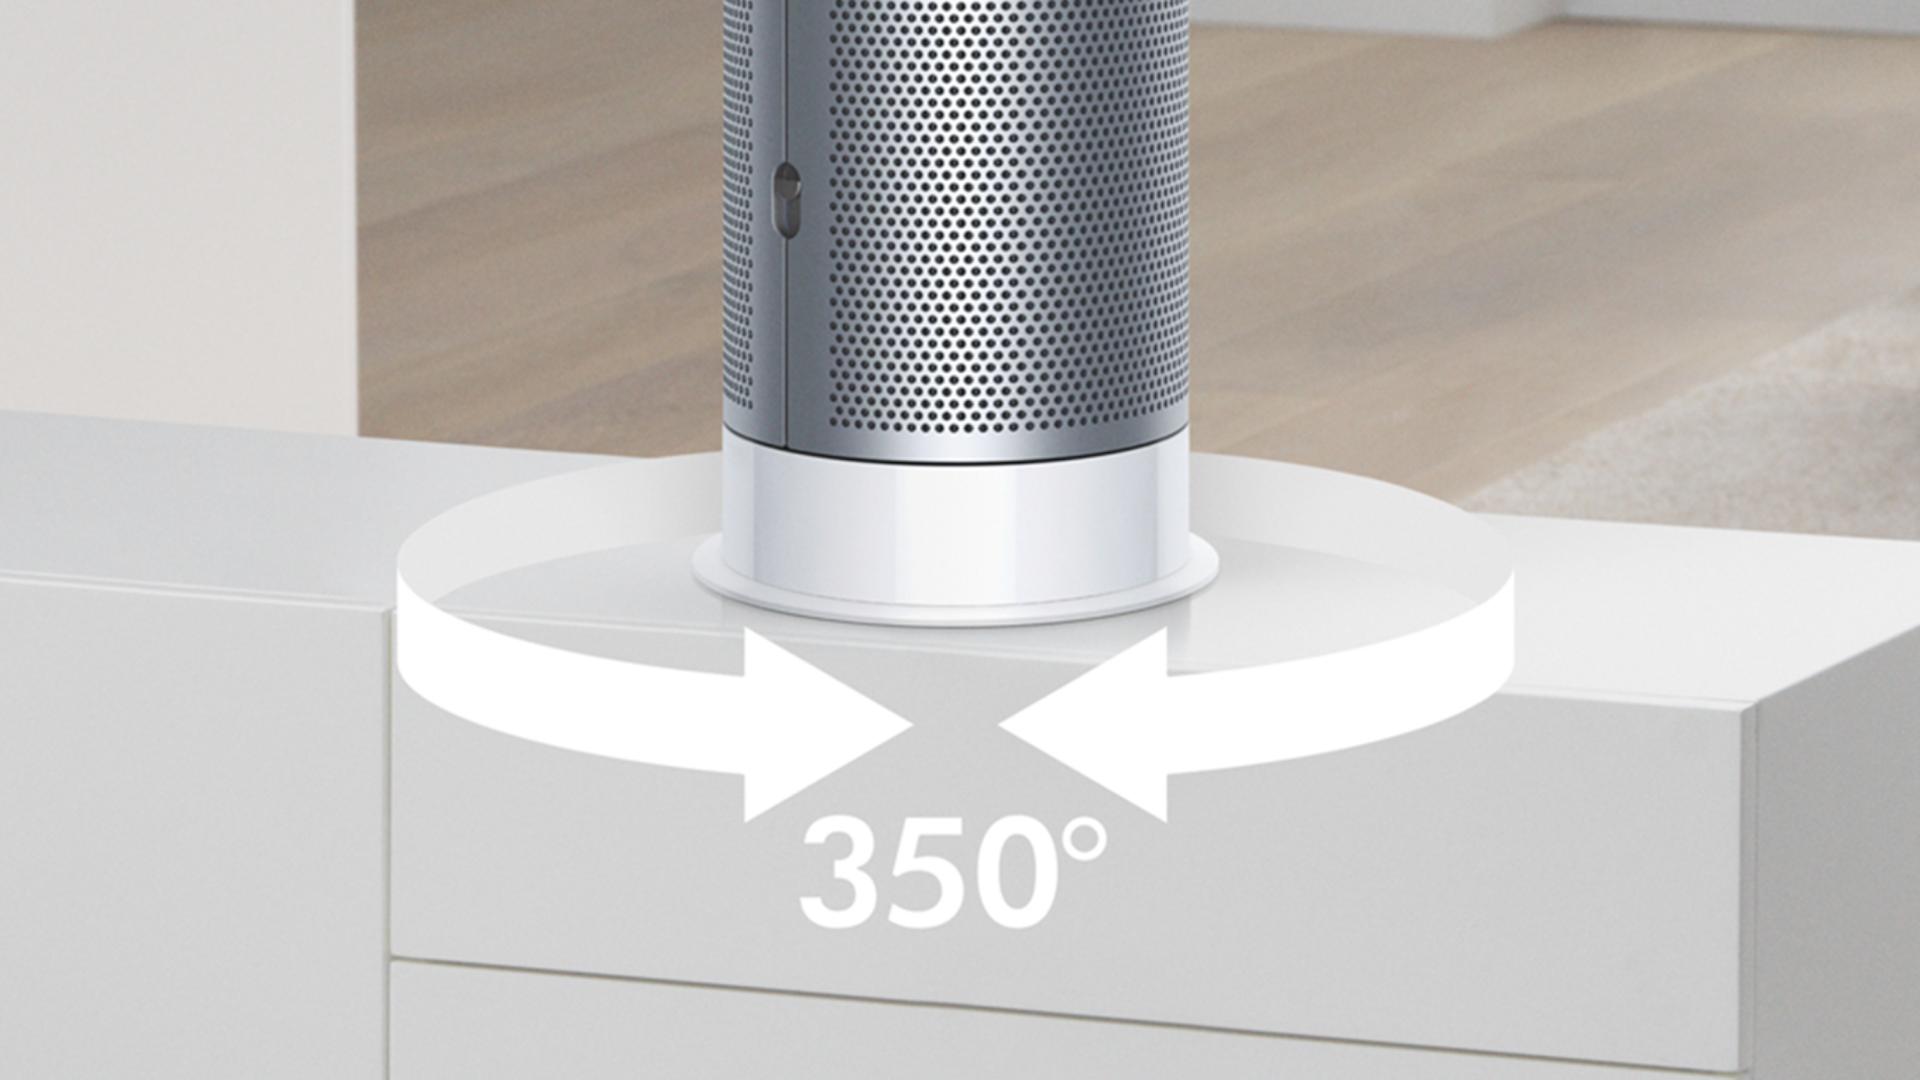 Graphic showing how the Dyson Pure Hot+Cool purifier turns 350 degrees